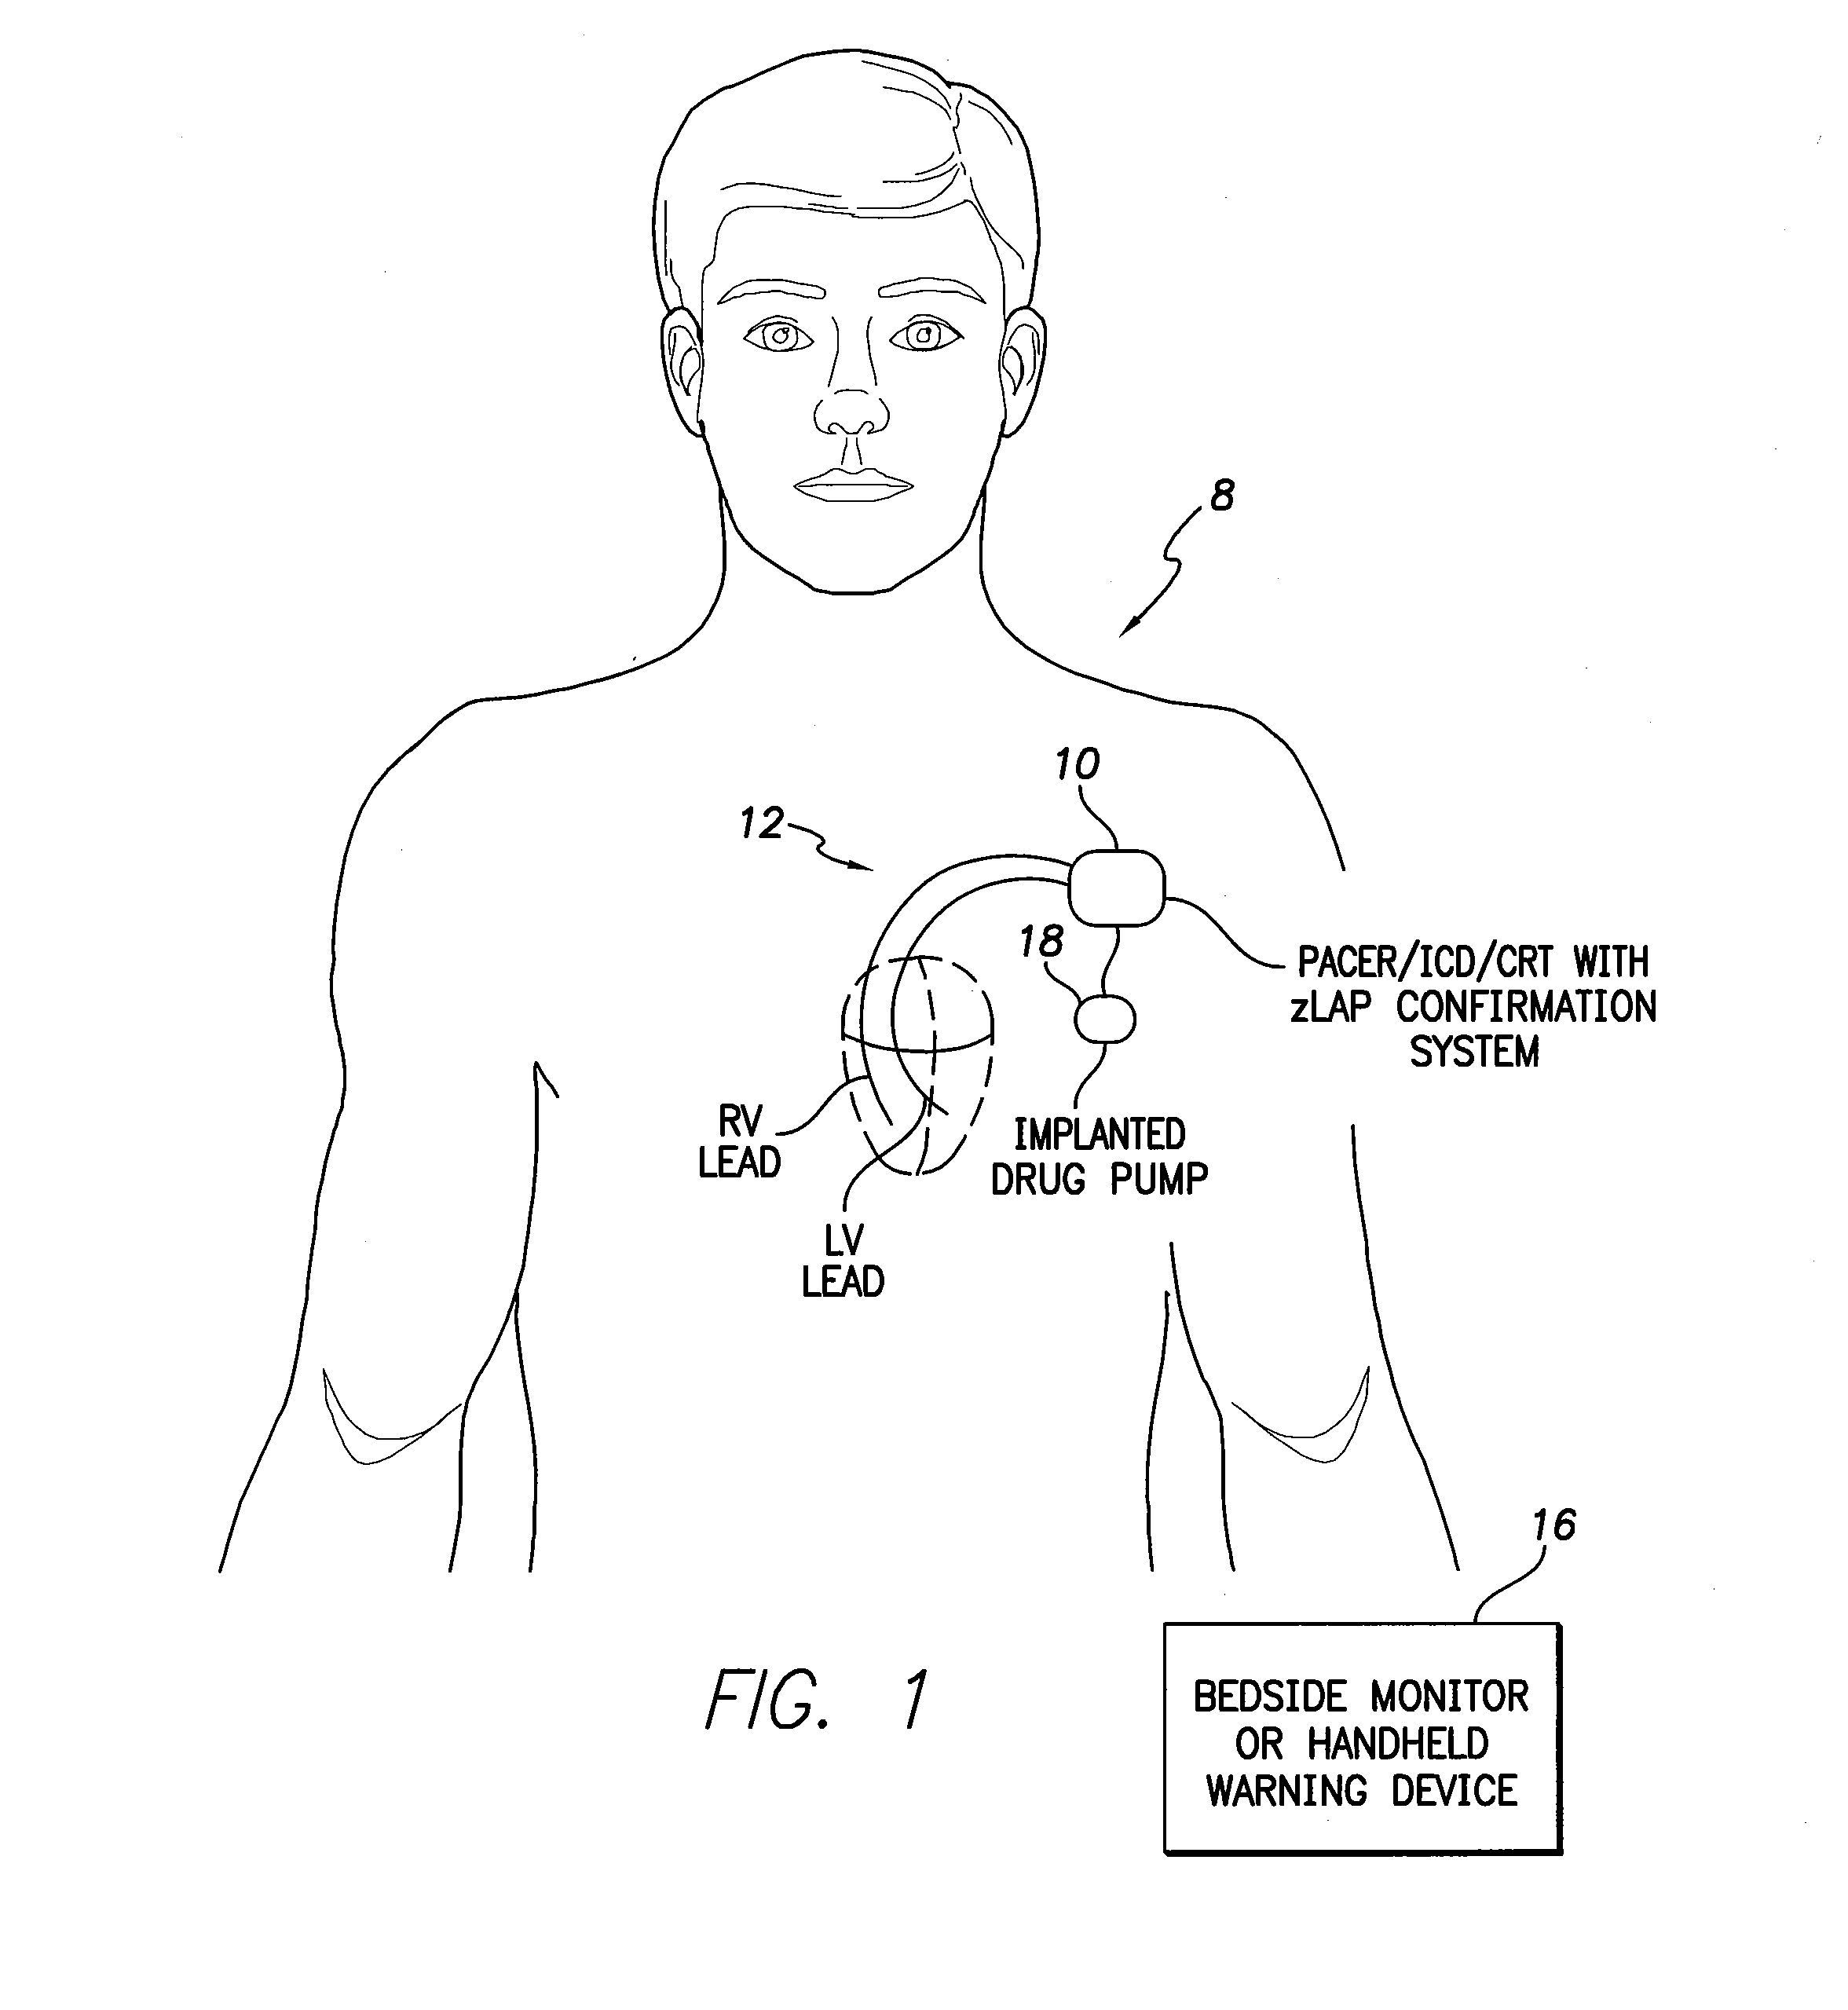 Systems and methods for corroborating impedance-based left atrial pressure (LAP) estimates for use by an implantable medical device